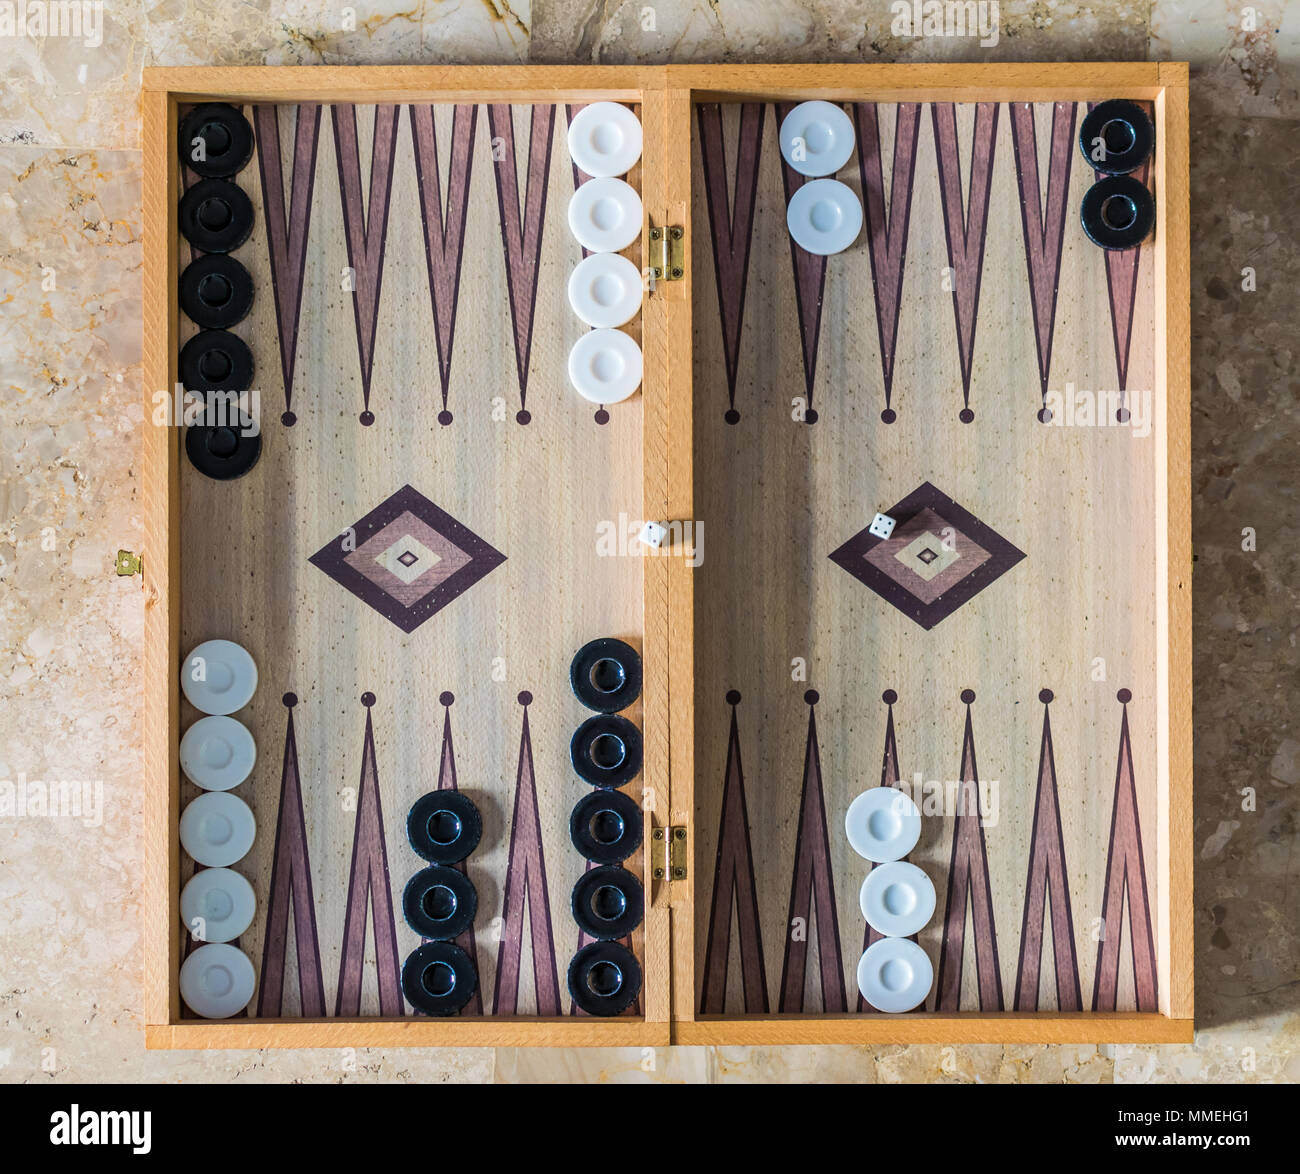 Close up of a backgammon board with dice Stock Photo